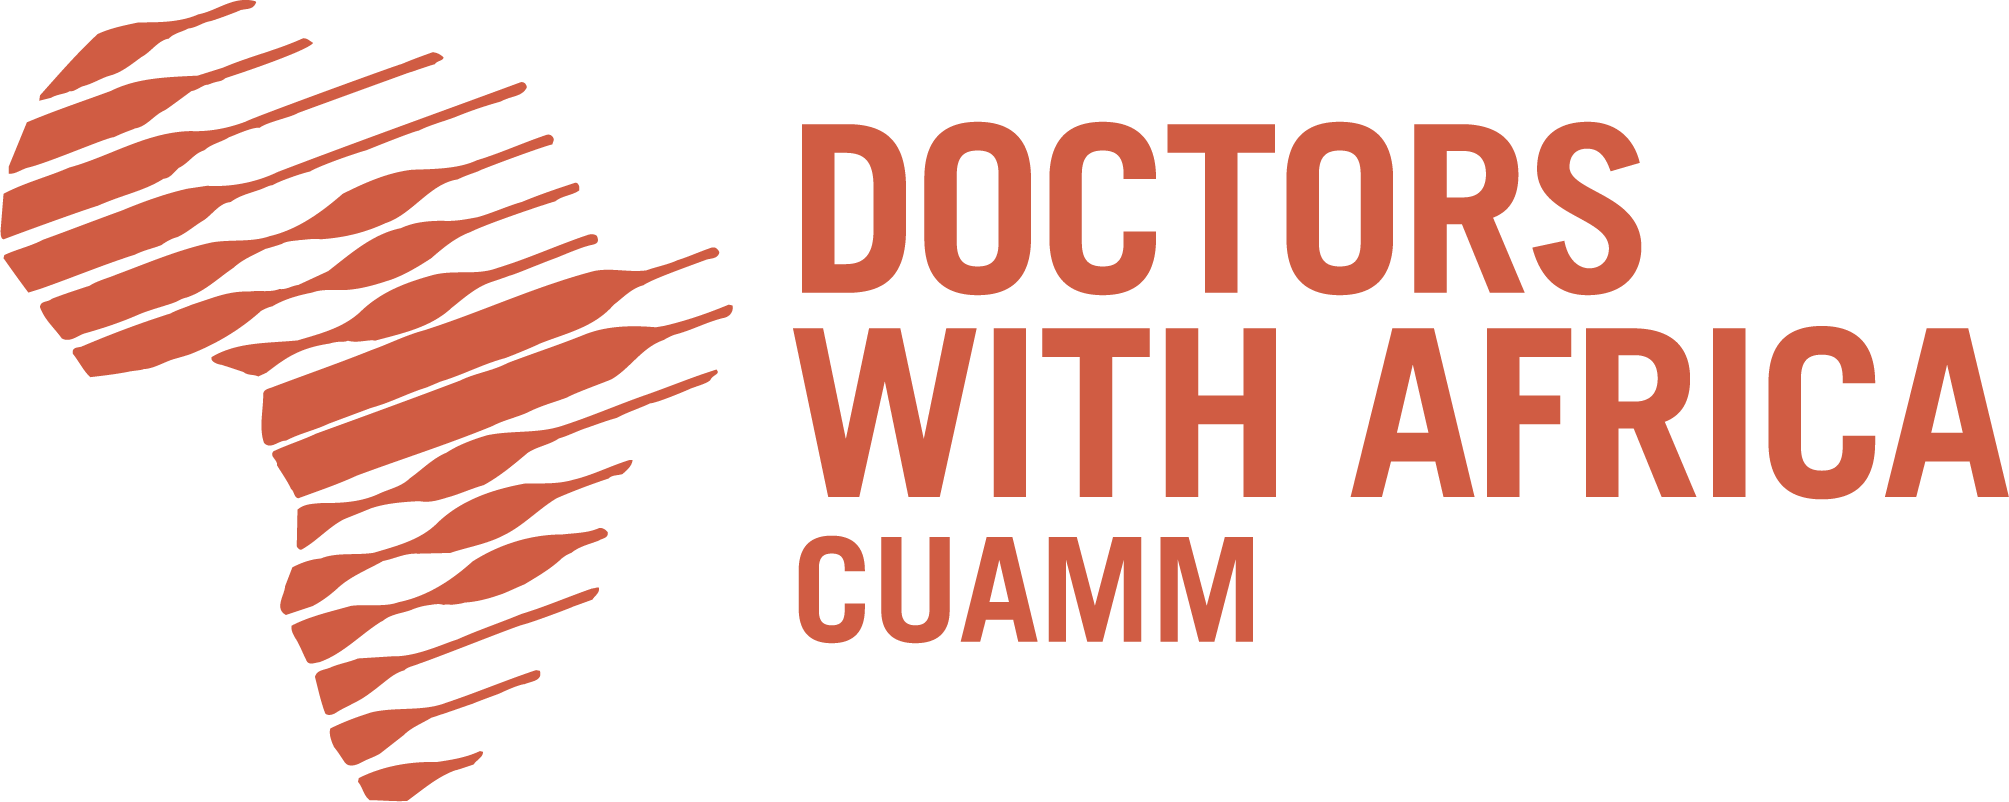 Doctors Logo - Home with Africa CUAMM